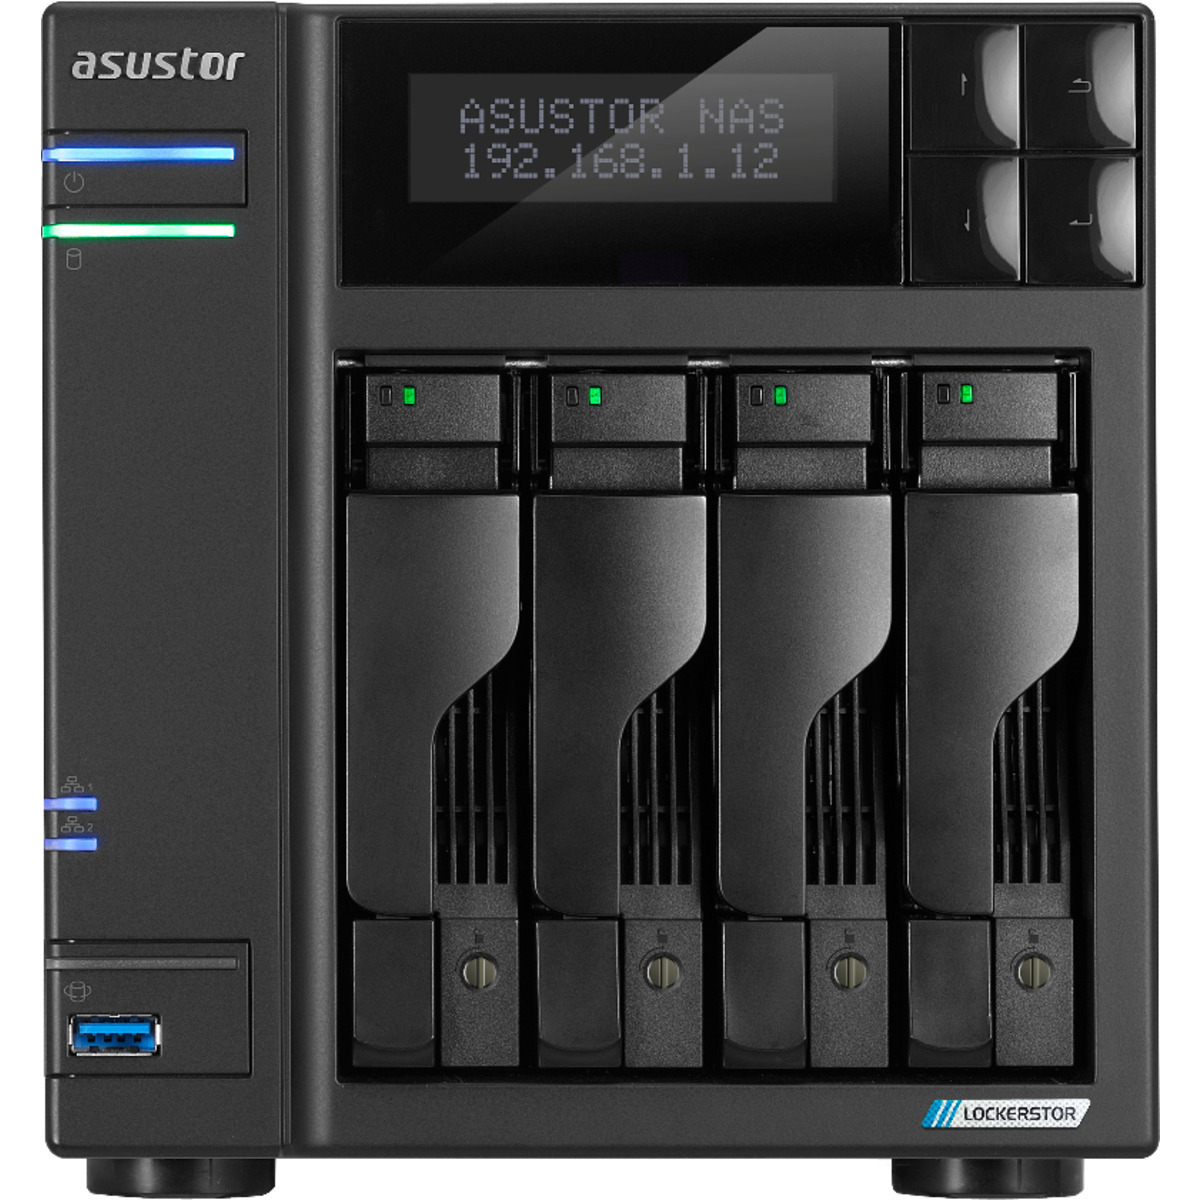 ASUSTOR LOCKERSTOR 4 Gen2 AS6704T 32tb 4-Bay Desktop Multimedia / Power User / Business NAS - Network Attached Storage Device 4x8tb Seagate EXOS 7E10 ST8000NM017B 3.5 7200rpm SATA 6Gb/s HDD ENTERPRISE Class Drives Installed - Burn-In Tested - FREE RAM UPGRADE LOCKERSTOR 4 Gen2 AS6704T